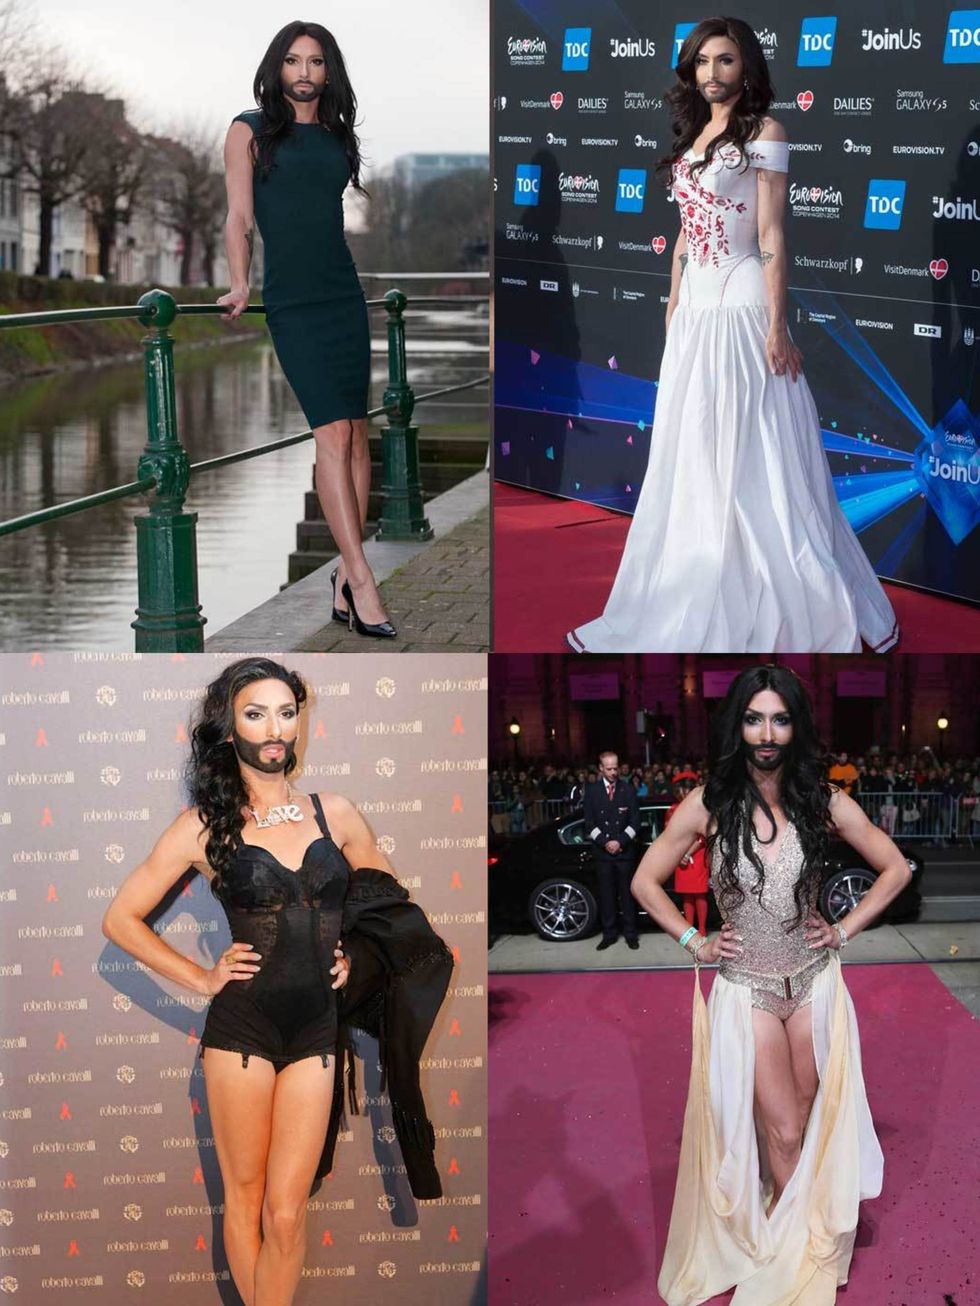 <p>How amazing is Conchita Wurst? The bearded drag queen won Eurovision this weekend and deftly fought back against intolerance too. We take a look at her wardrobe highlights...</p><p><a href="http://www.elleuk.com/style/occasions/festival-bands-to-watch-